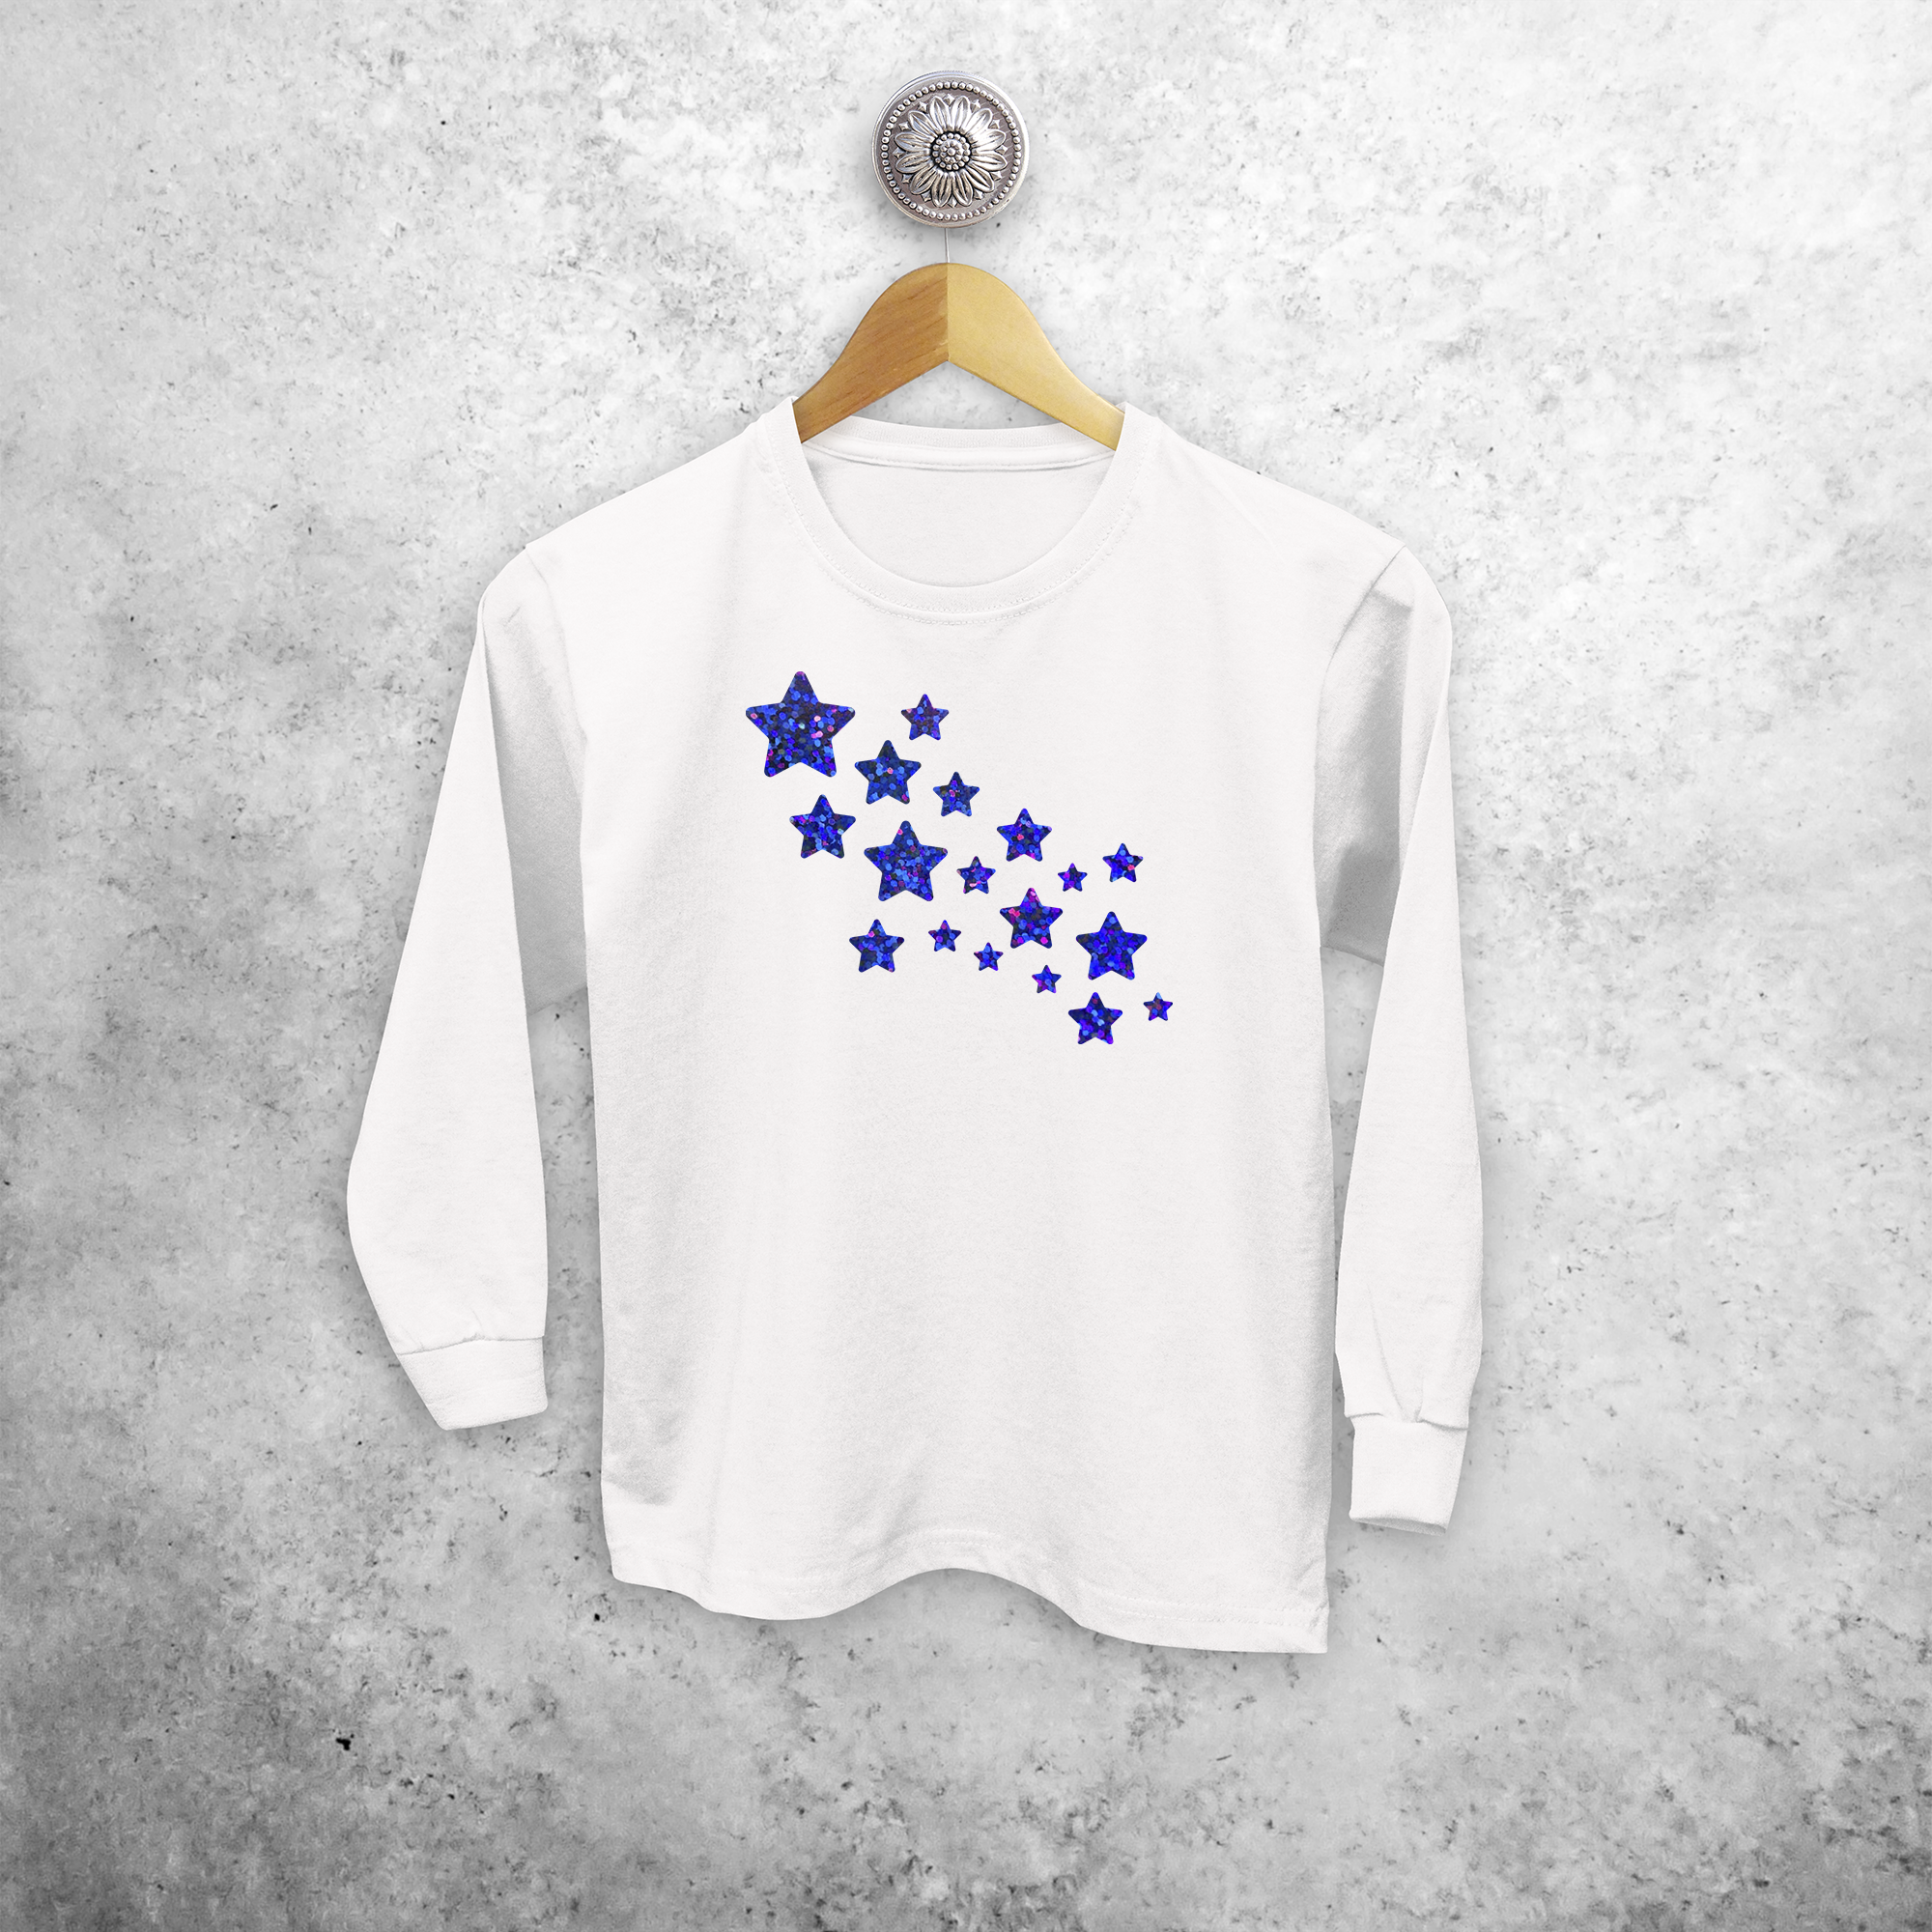 Kids shirt with long sleeves, with sparkly blue stars print by KMLeon.